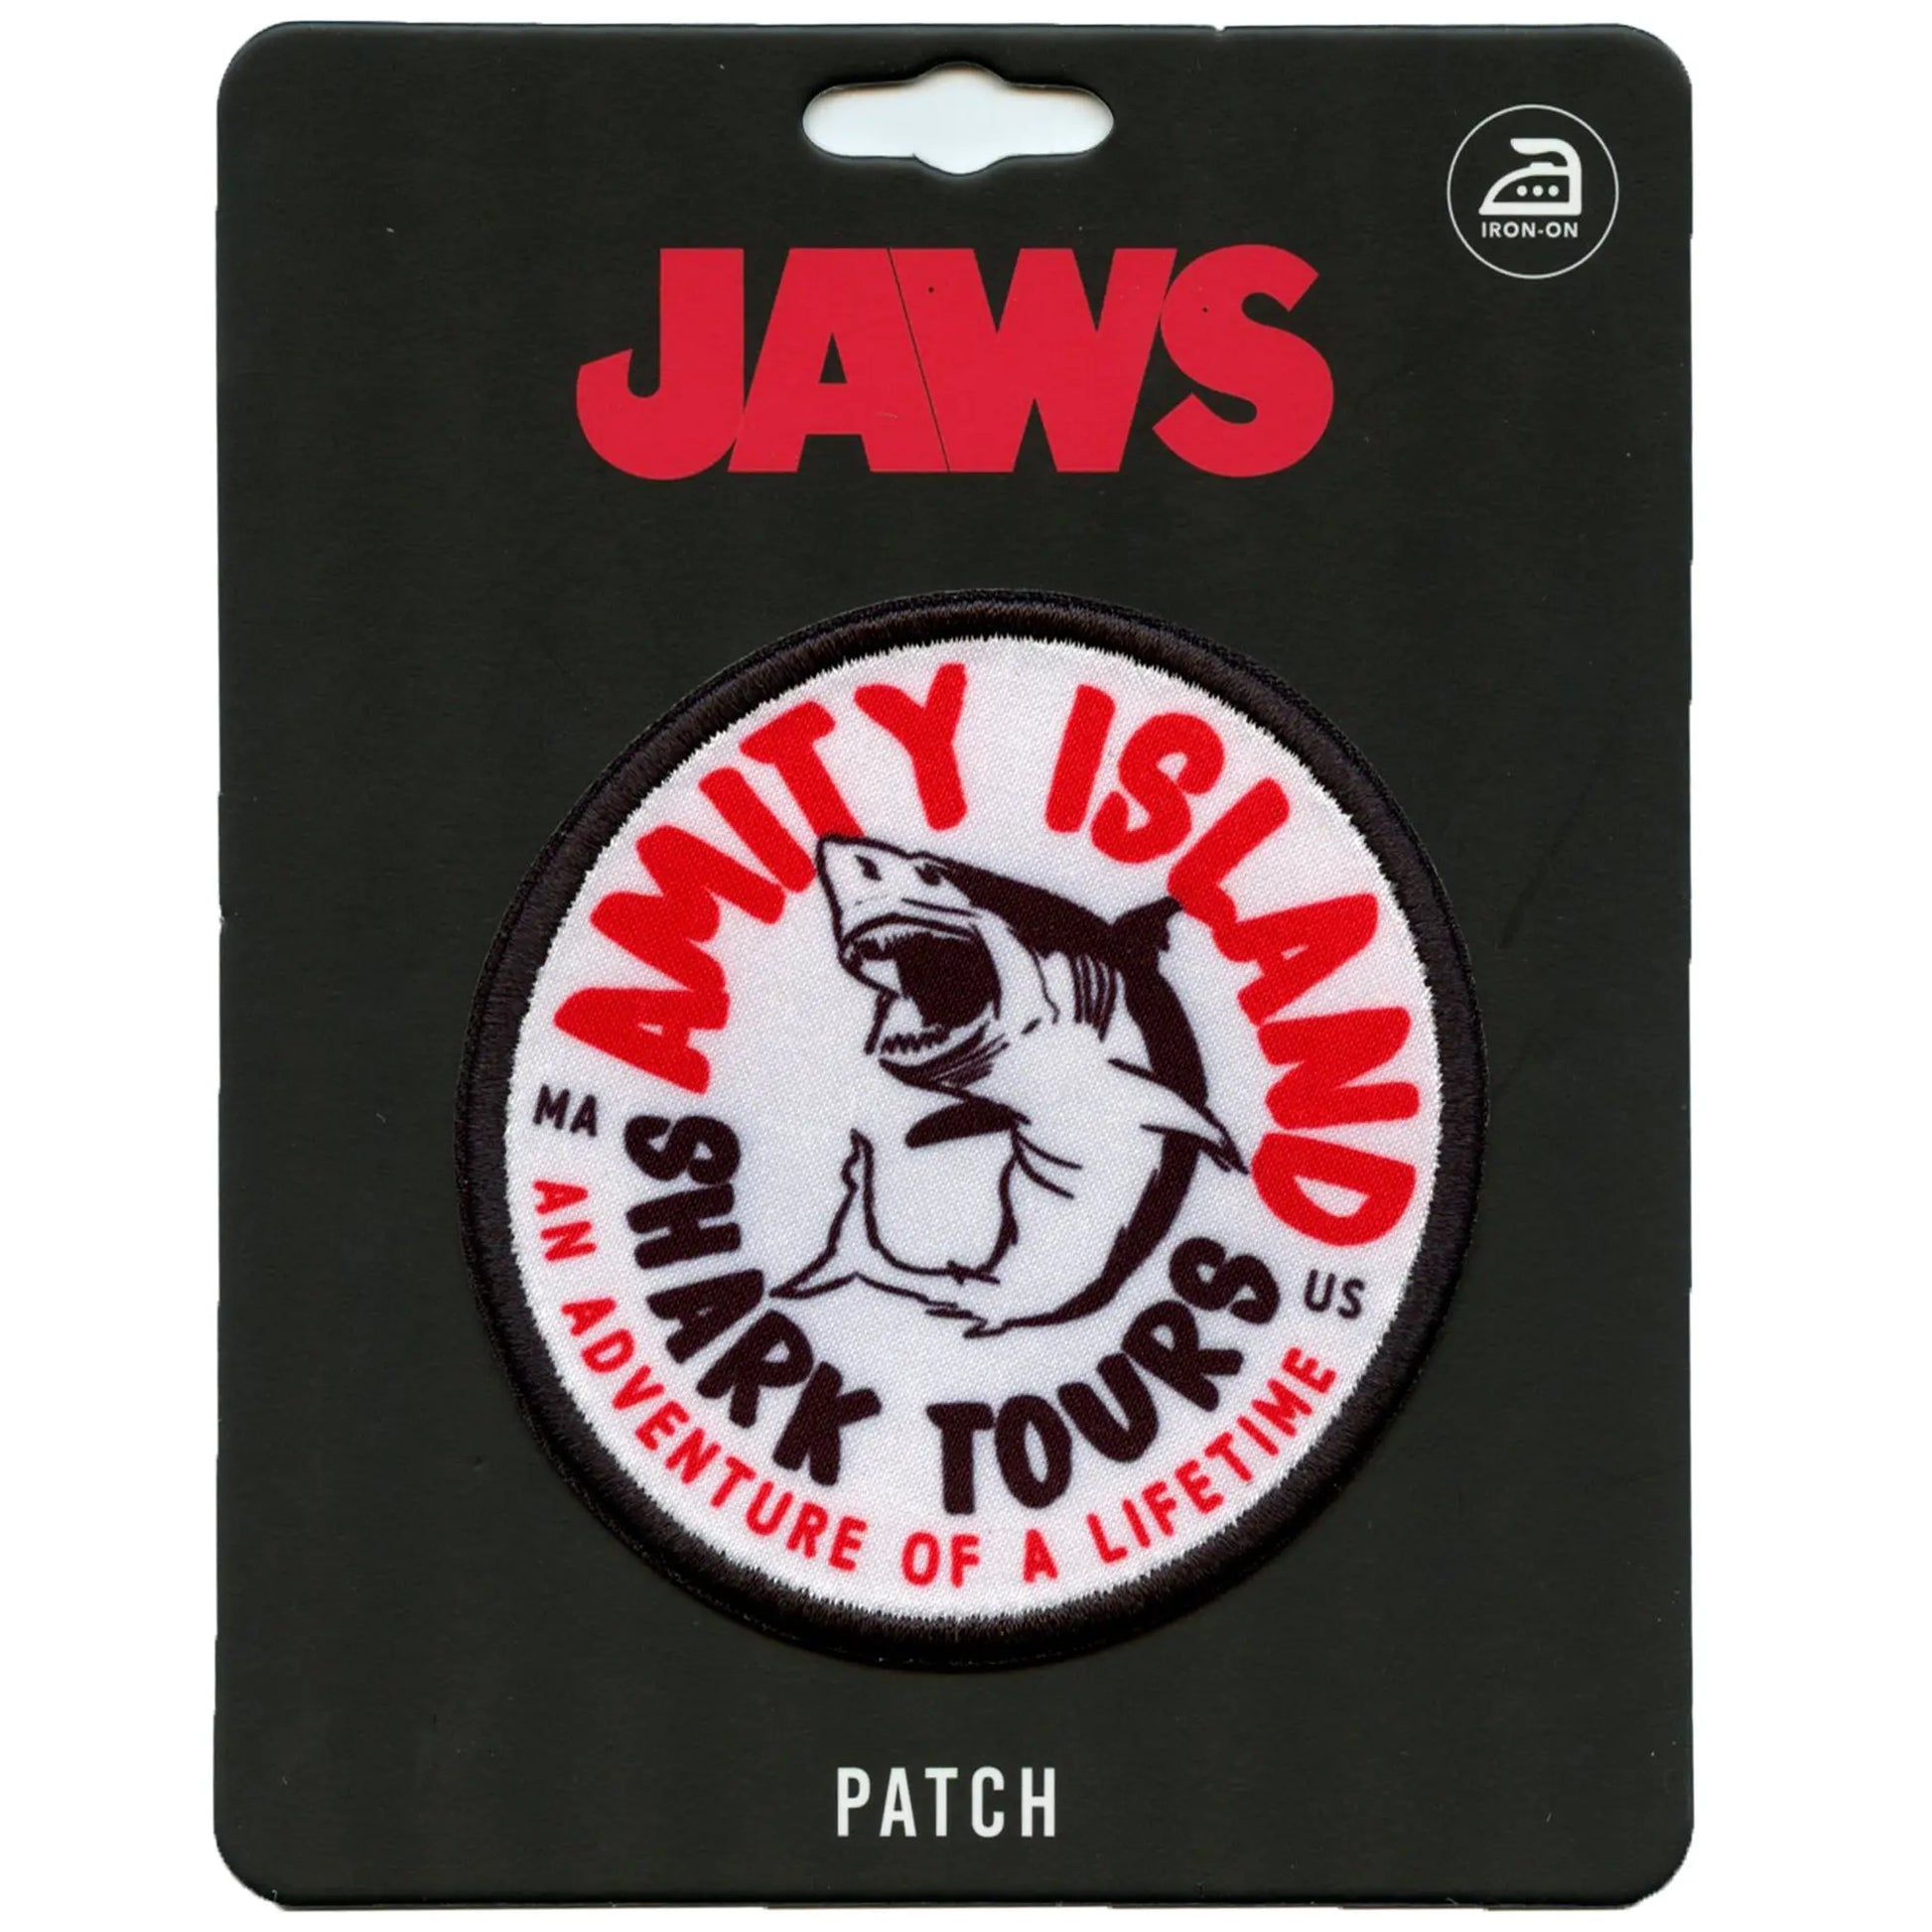 Amity Island Shark Tours Patch Adventure of a Lifetime Sublimated Iron On